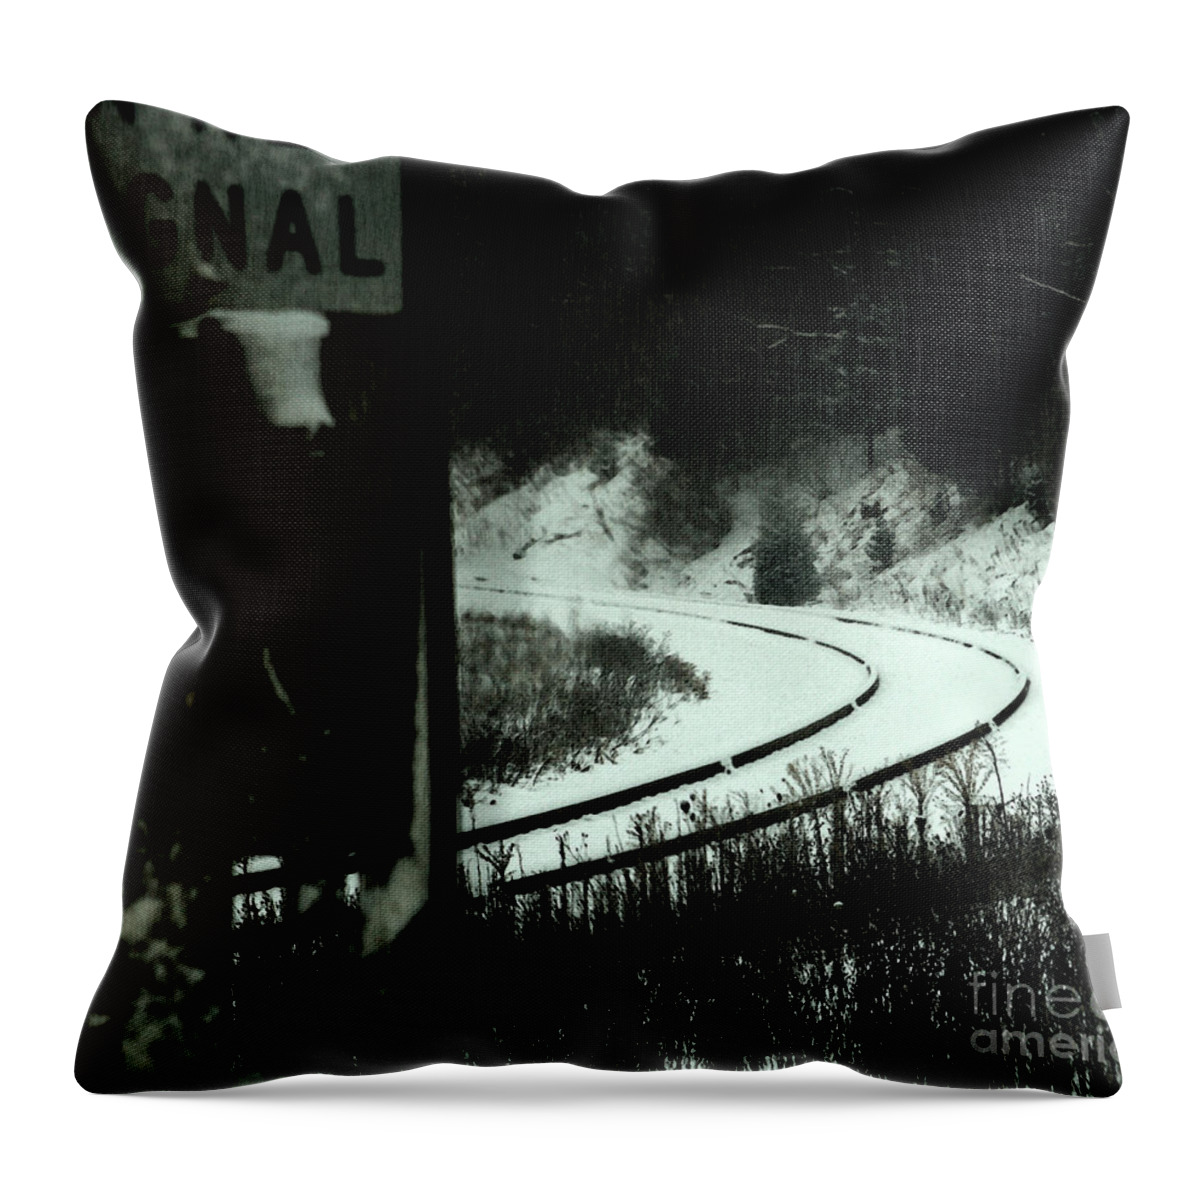 Rail Throw Pillow featuring the photograph The Rail To Anywhere by Linda Shafer